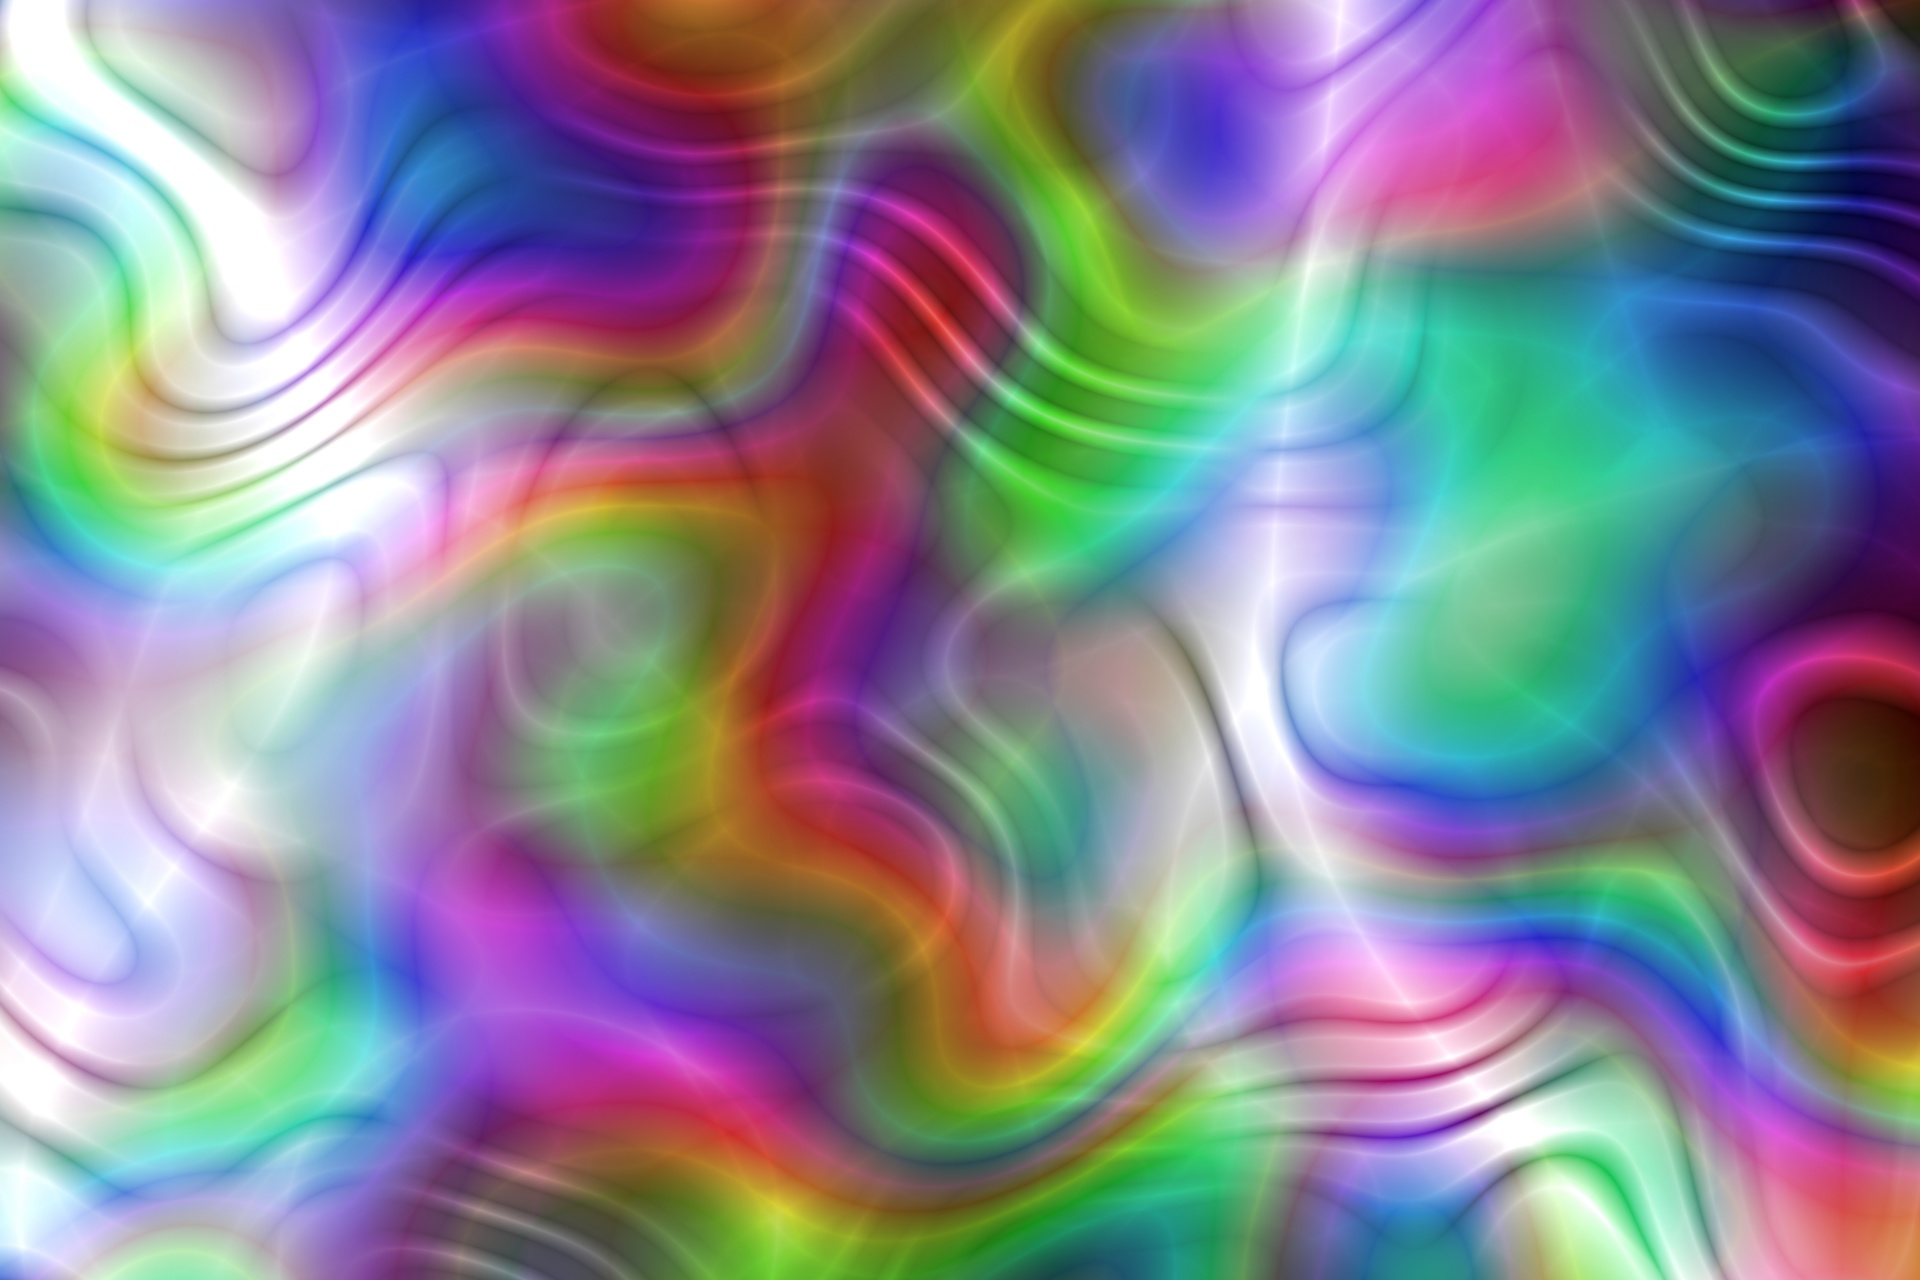 Abstract Art Background Pattern